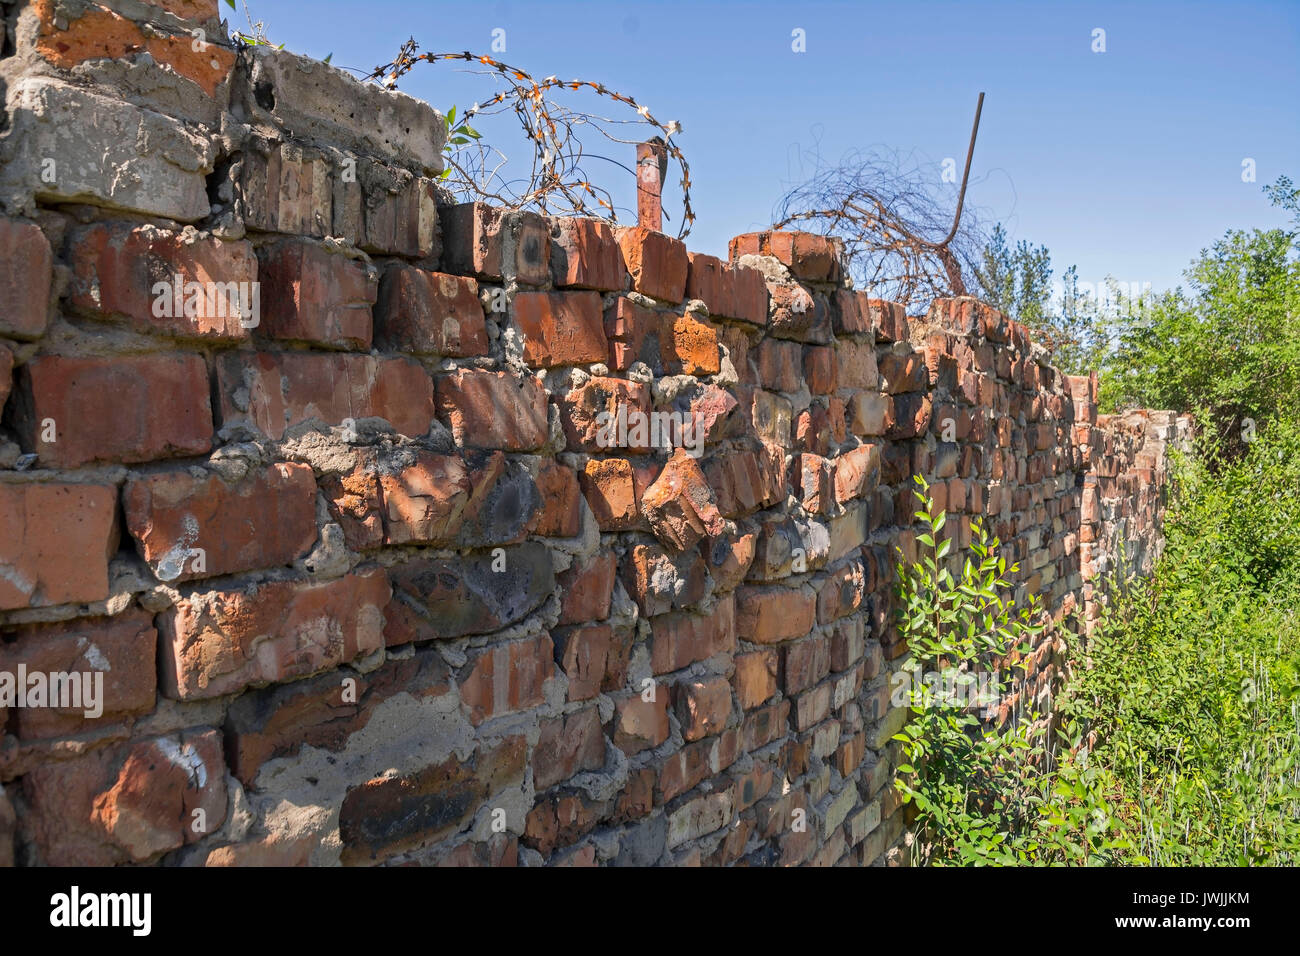 Old destroyed brick fence with barbed wire on field. Part of brick wall in ruins Stock Photo